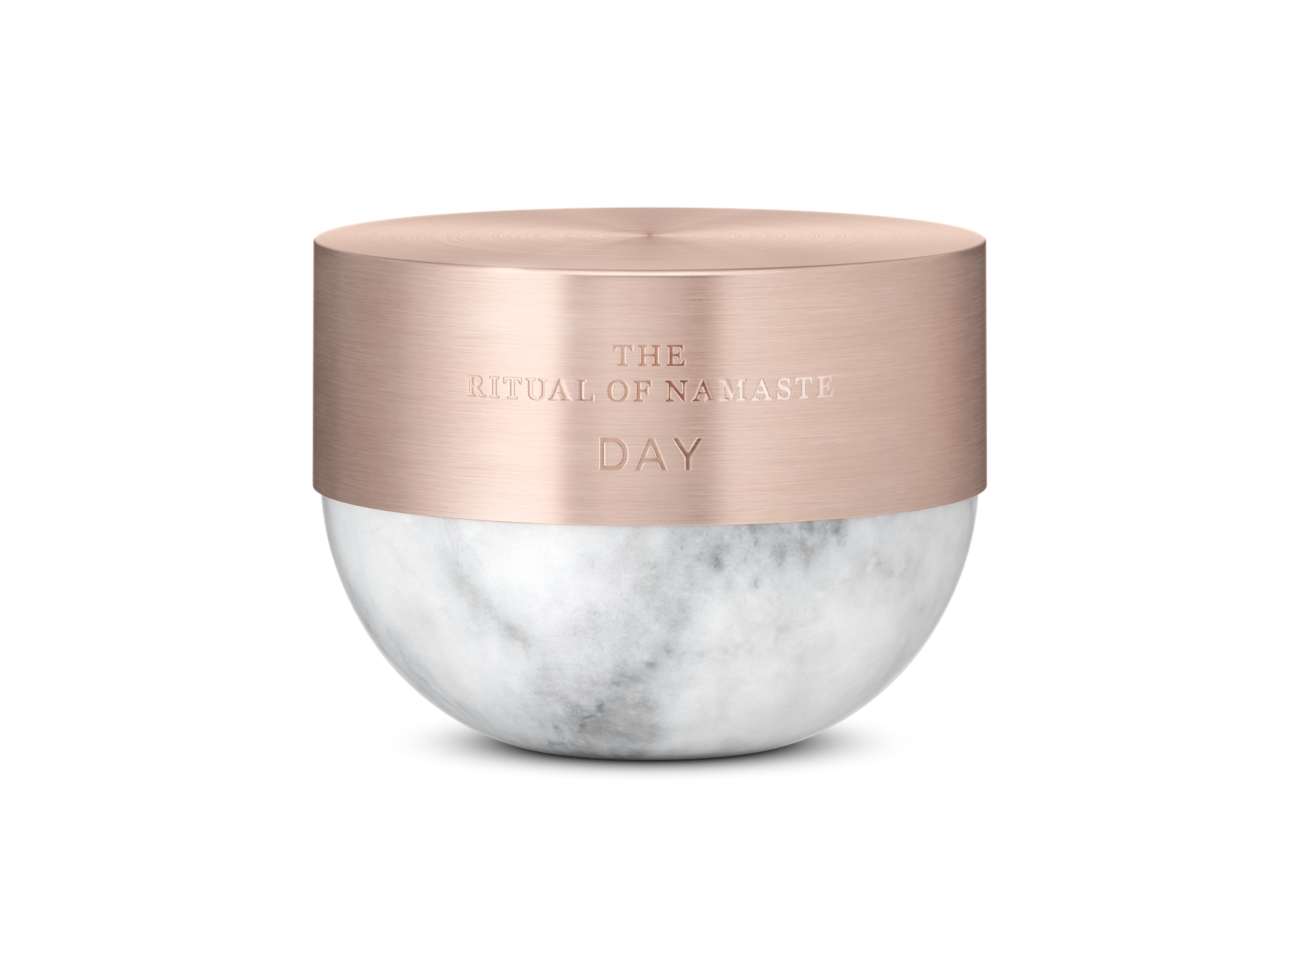 Dwaal Zinloos Onvoorziene omstandigheden Namasté Radiance Anti-Aging Day Cream - RITUALS Skincare